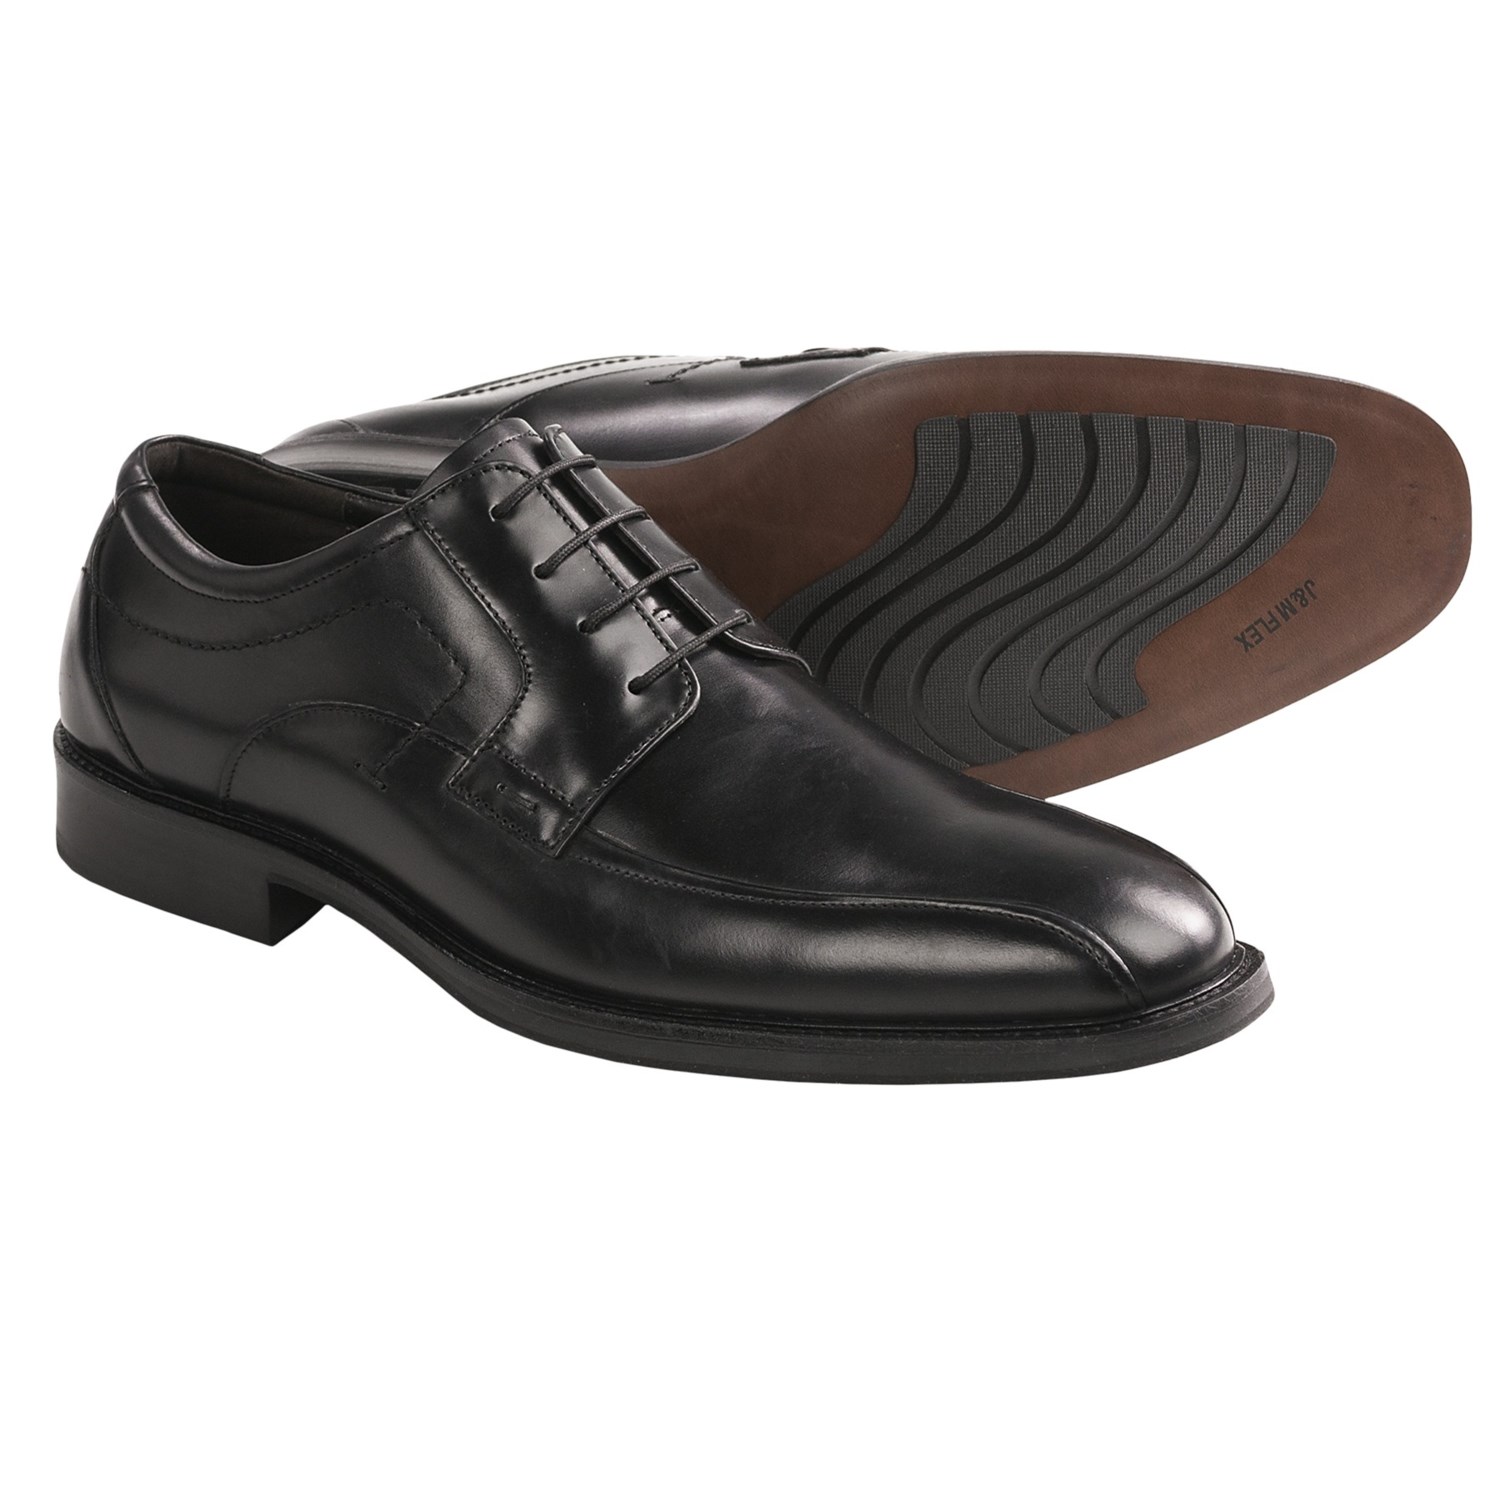 johnston-and-murphy-alderson-runoff-shoes-lace-ups-for-men-in-black~p ...